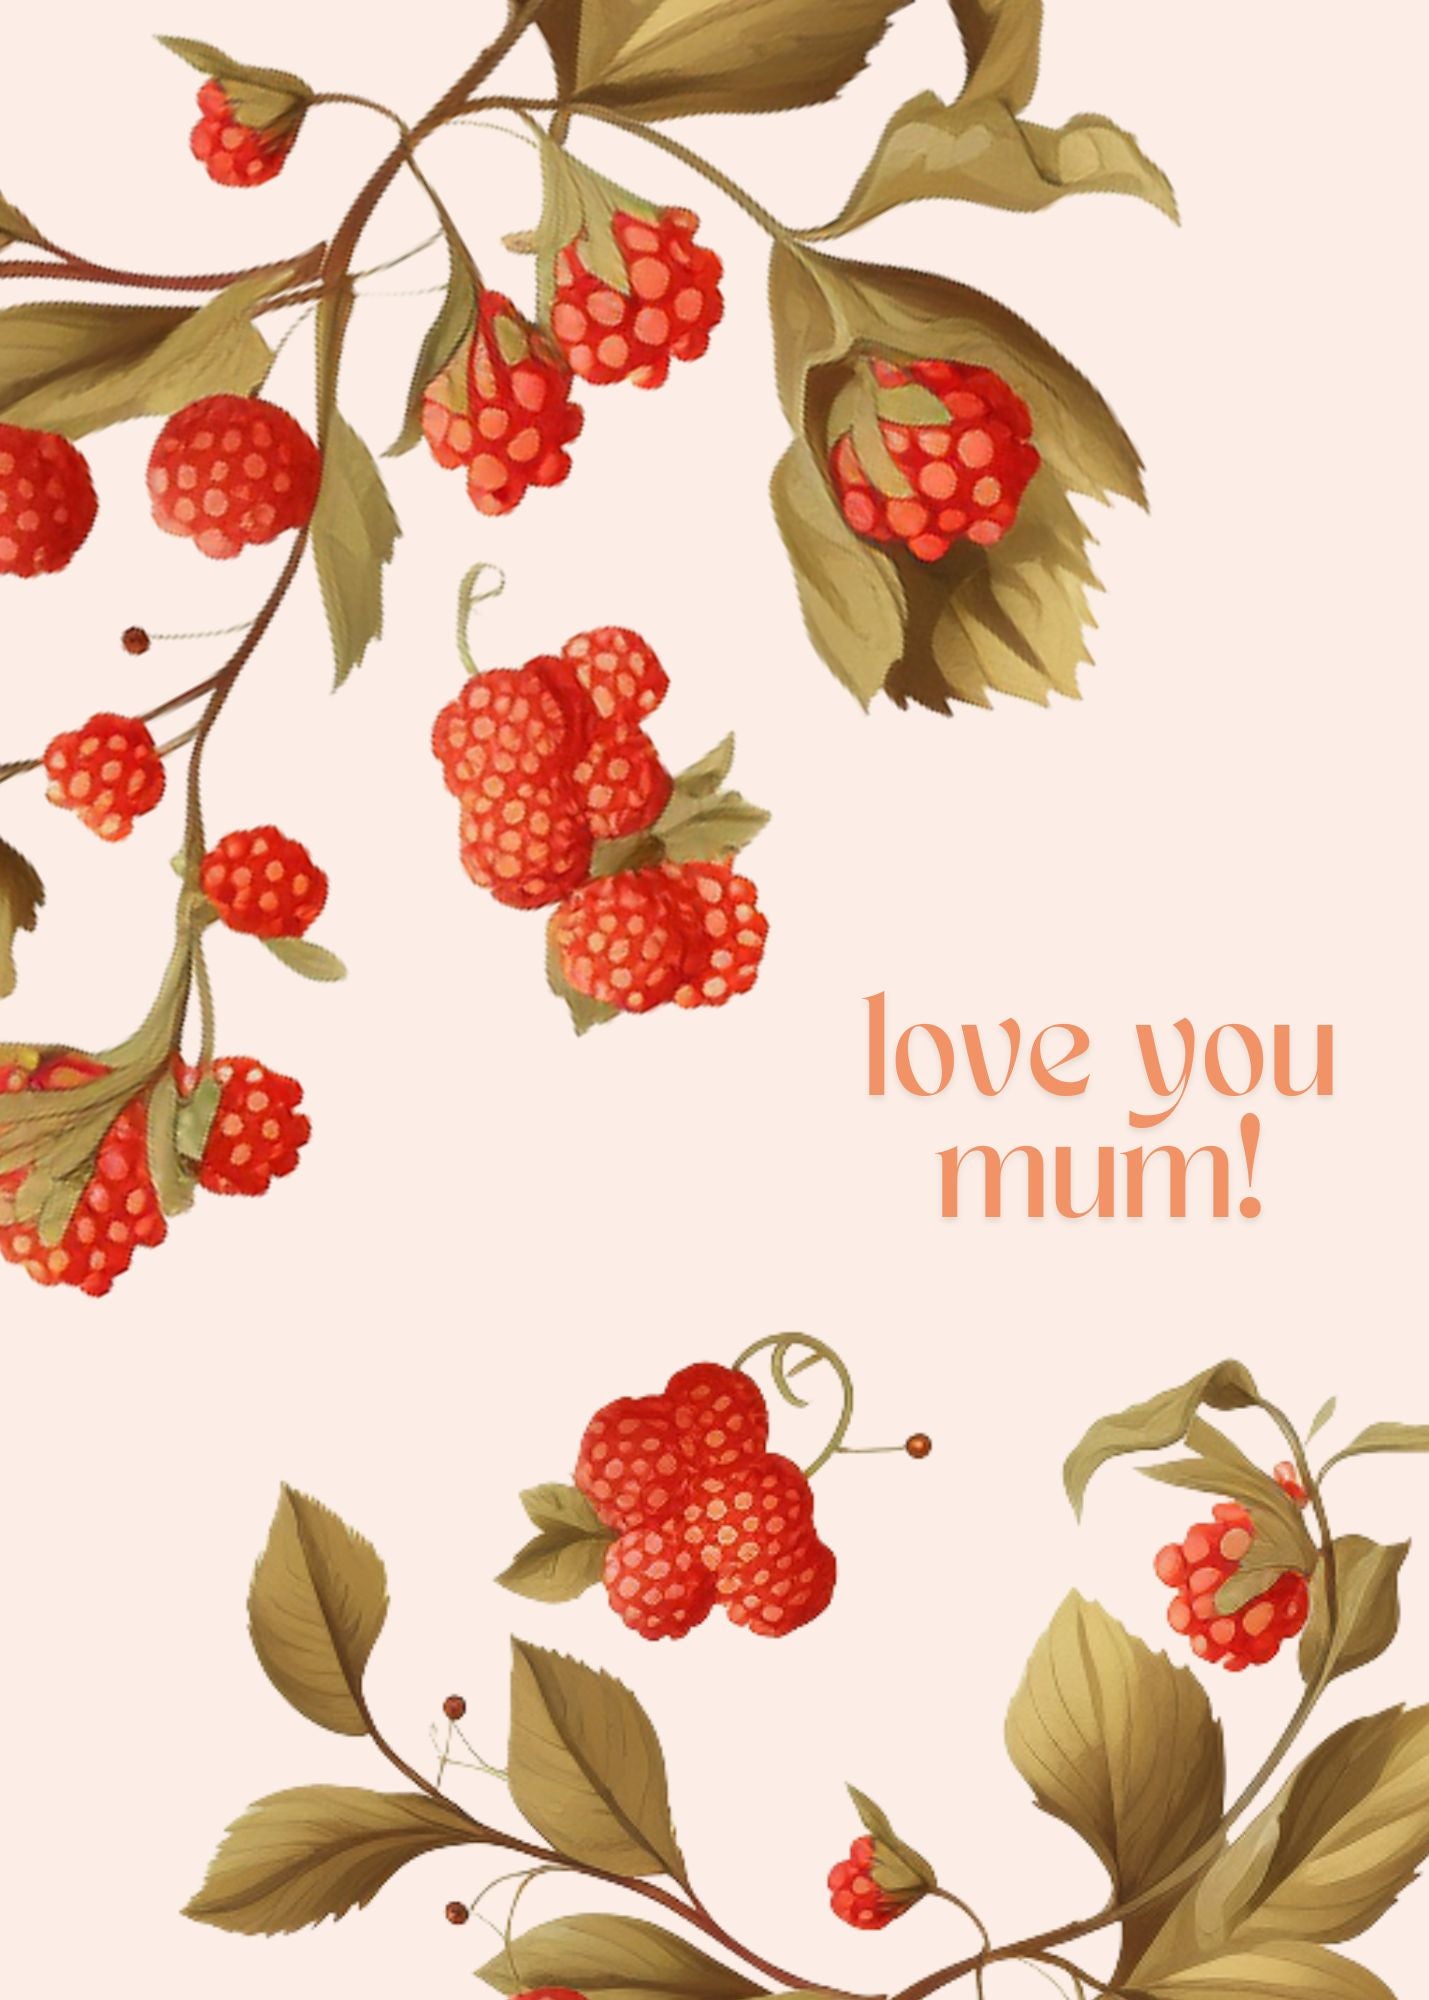 mothers day diy card ideas craft printable canva red berries